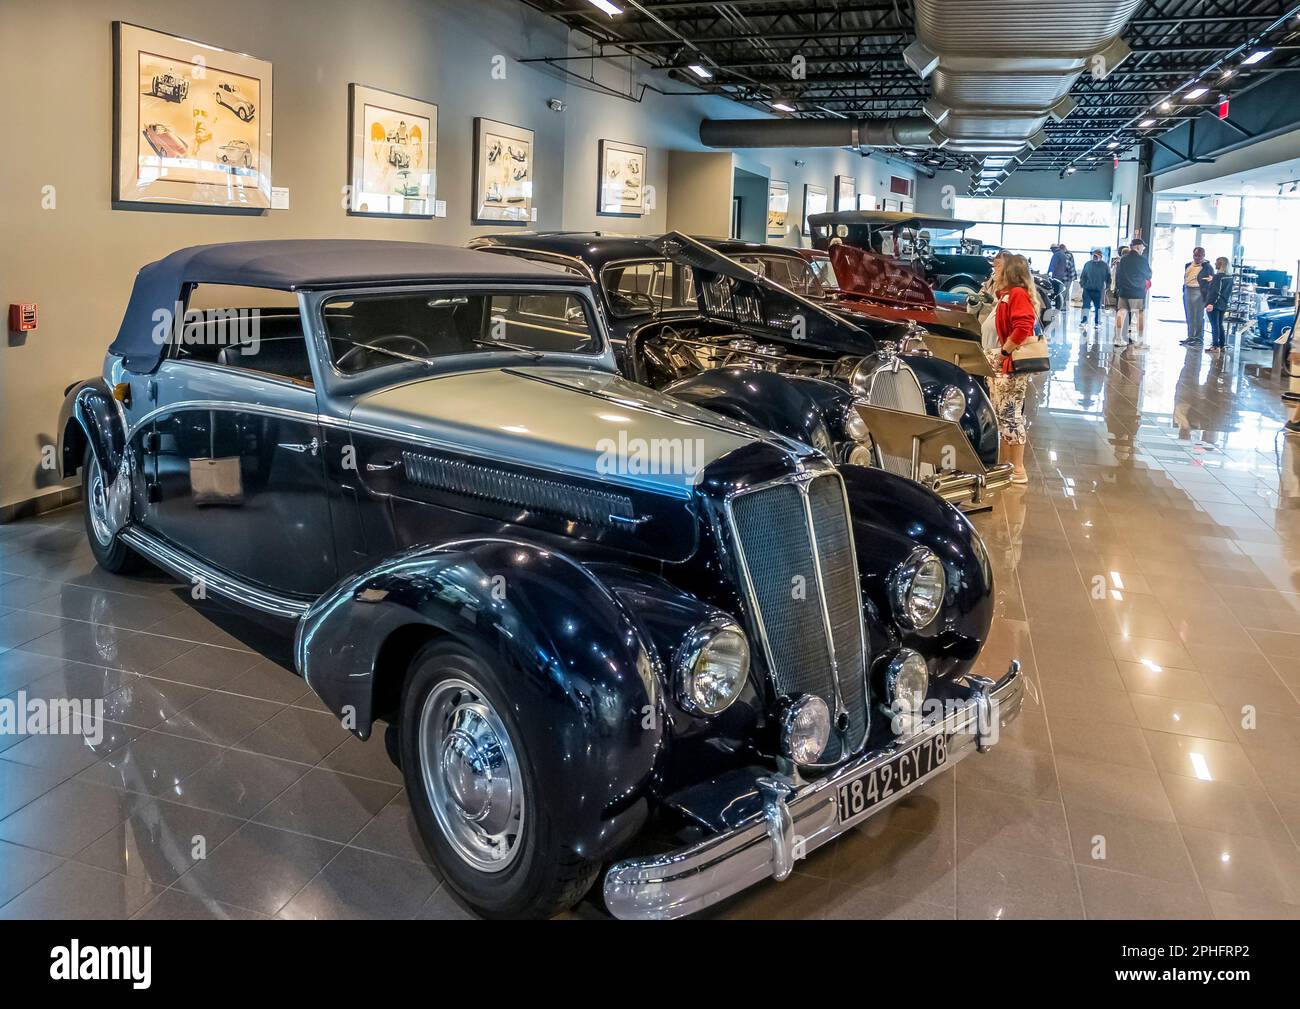 Cars in the Tampa Bay Automobile Museum in Pinellas Par Florida USA Stock Photo